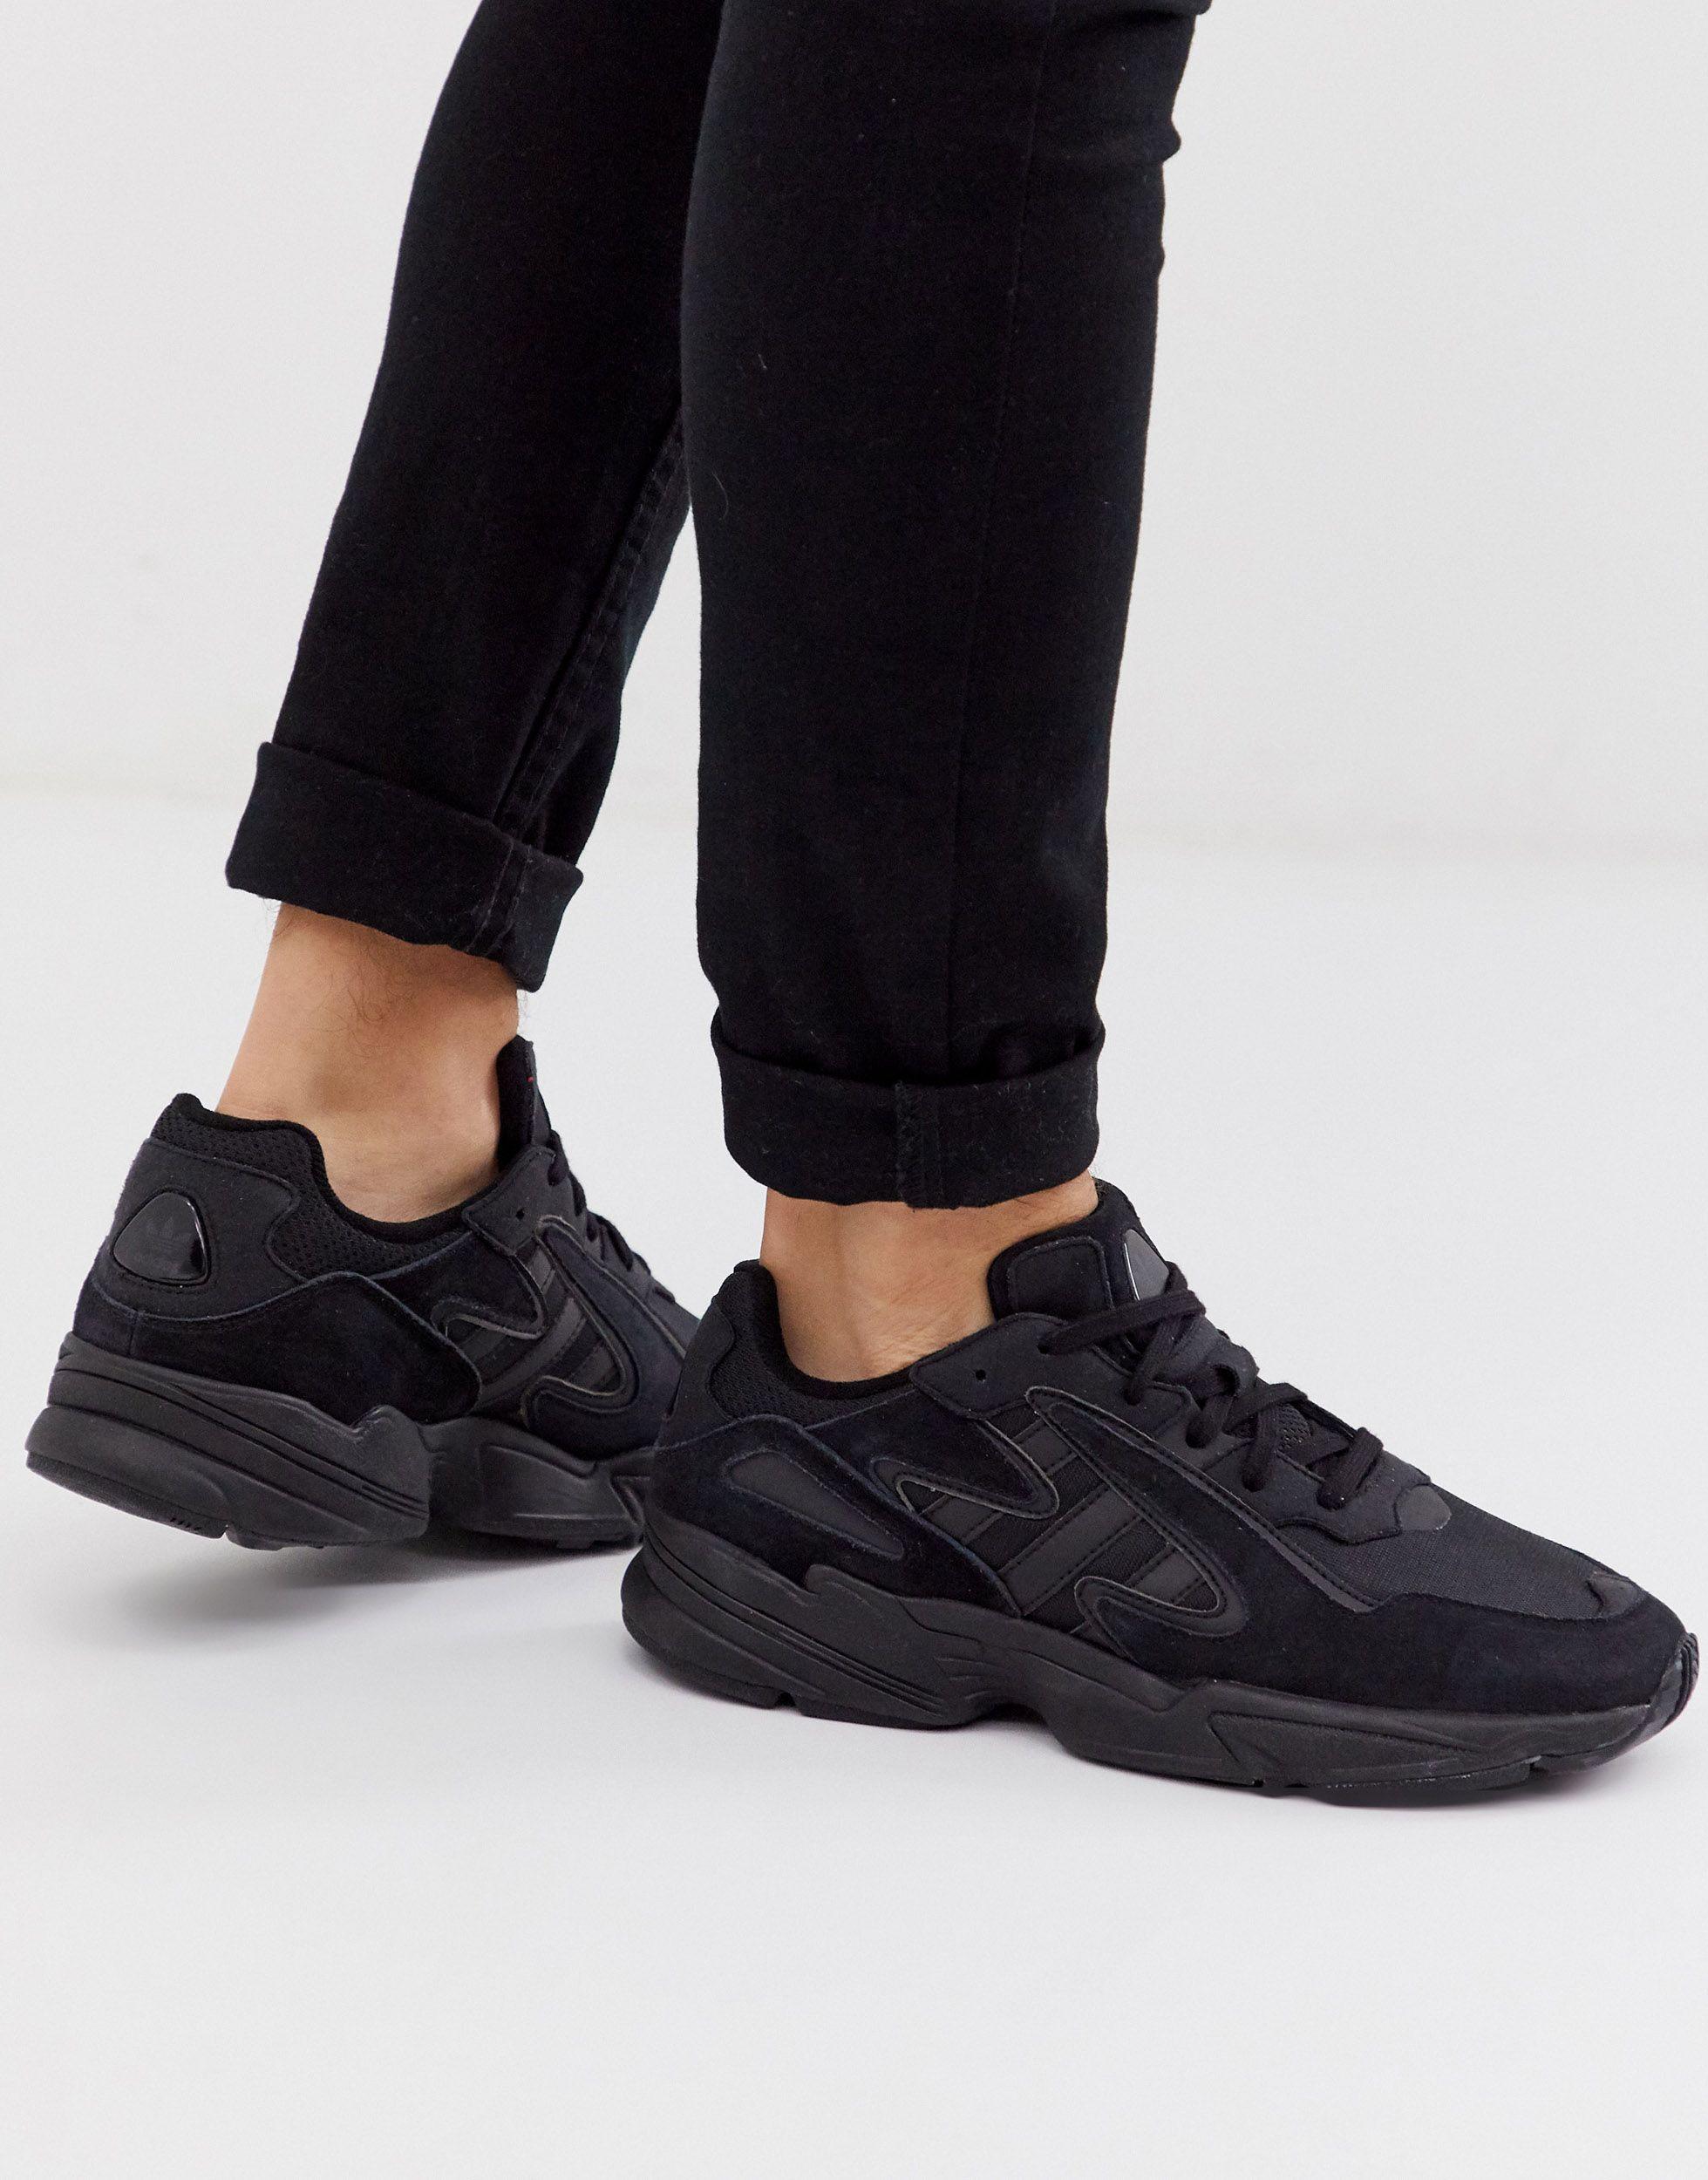 Adidas Originals Leather Yung 96 Chasm Triple Black For Men Lyst